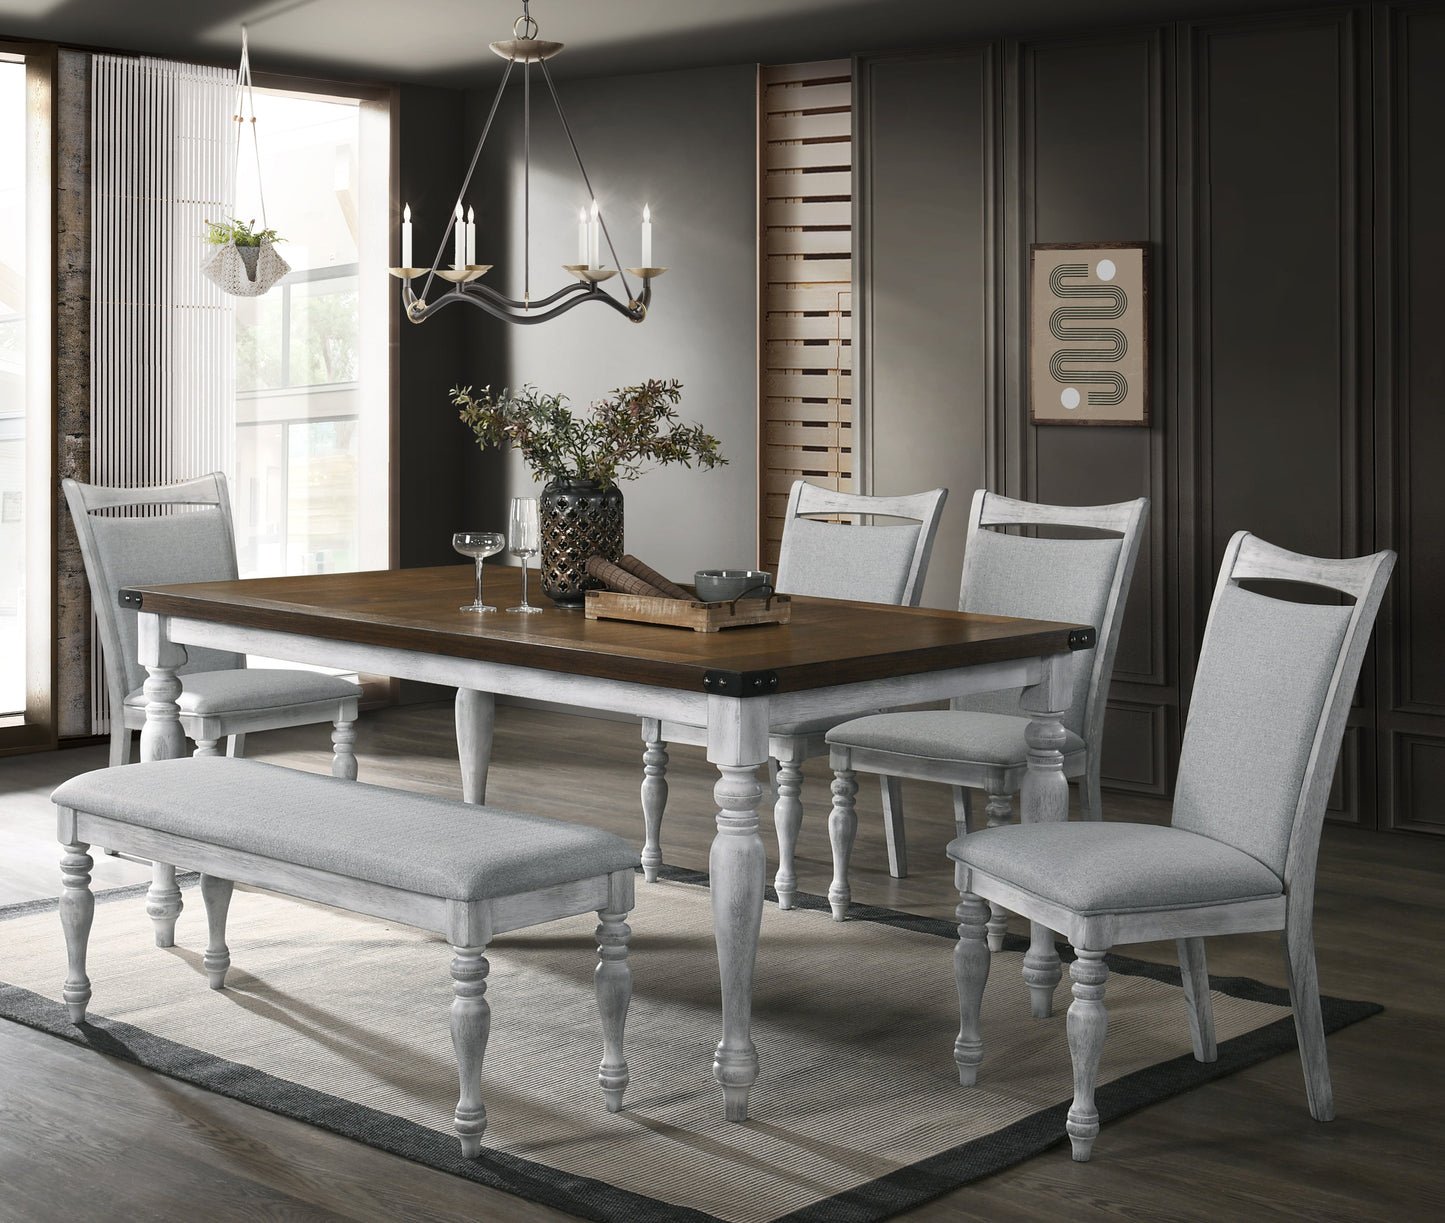 Salines 6 Piece Dining Table Set with 4 Upholstered Chairs and 1 Bench, Rustic White and Oak